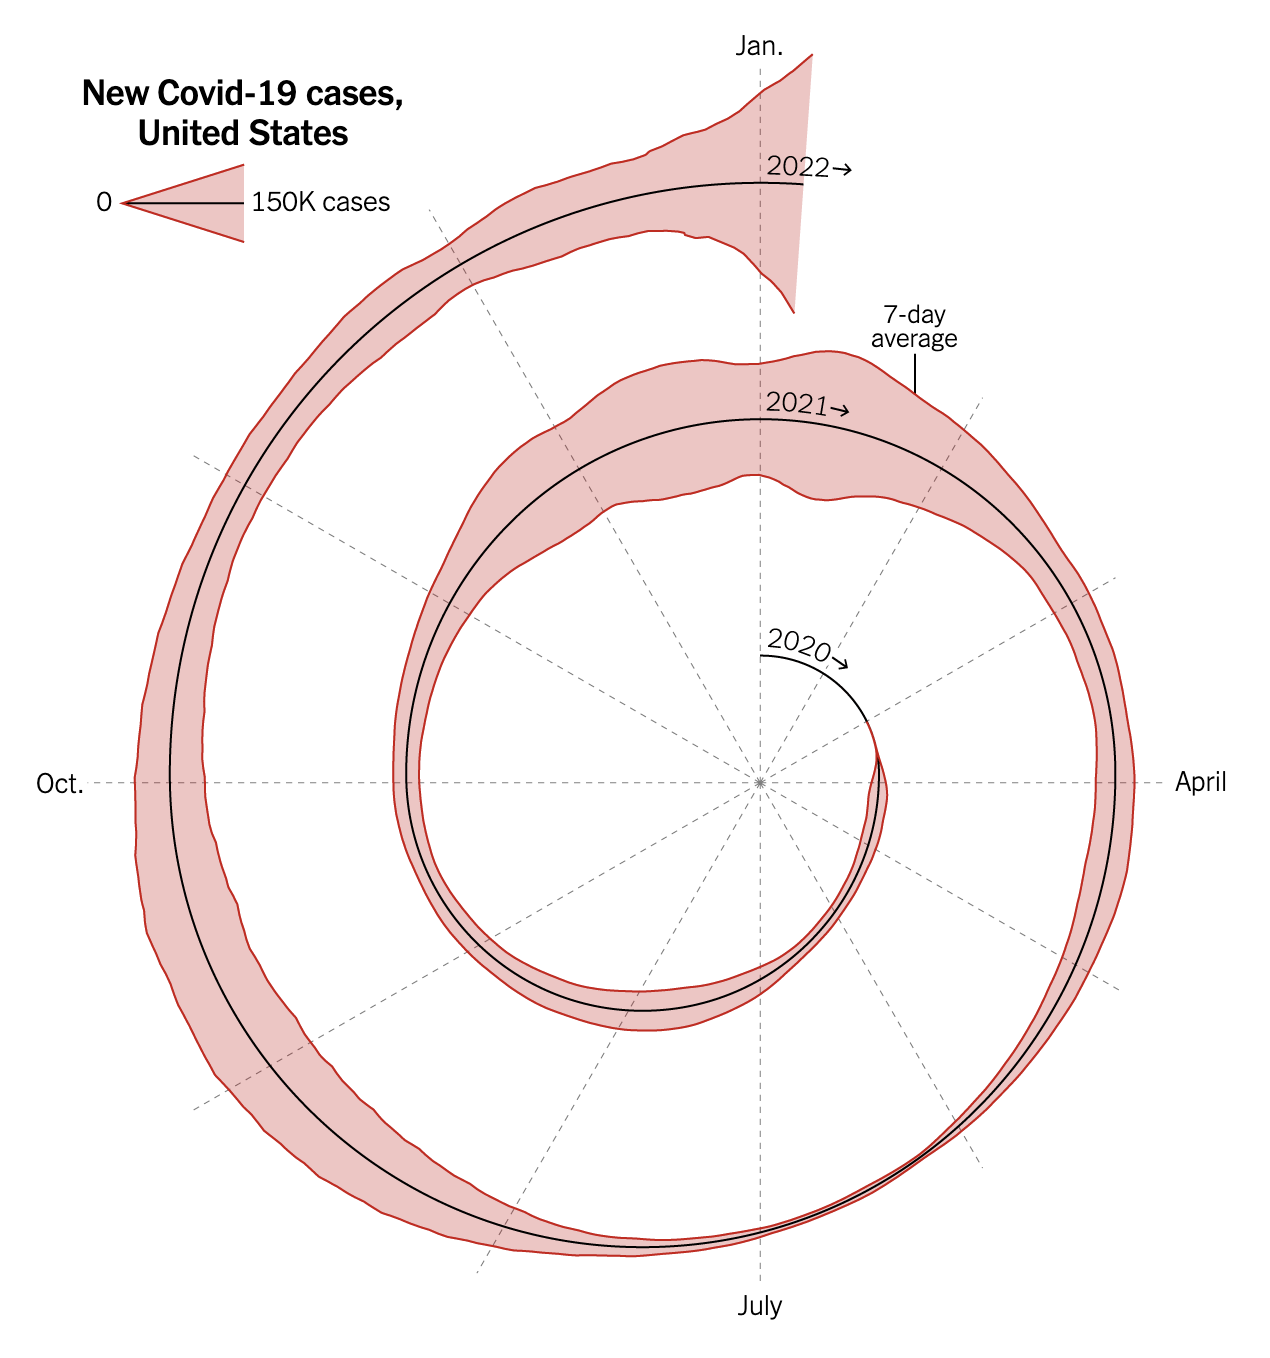 A chart in the form of a spiral, titled 'New Covid-19 cases, United States'. The spiral start small in 2020 and ends wide in January 2022